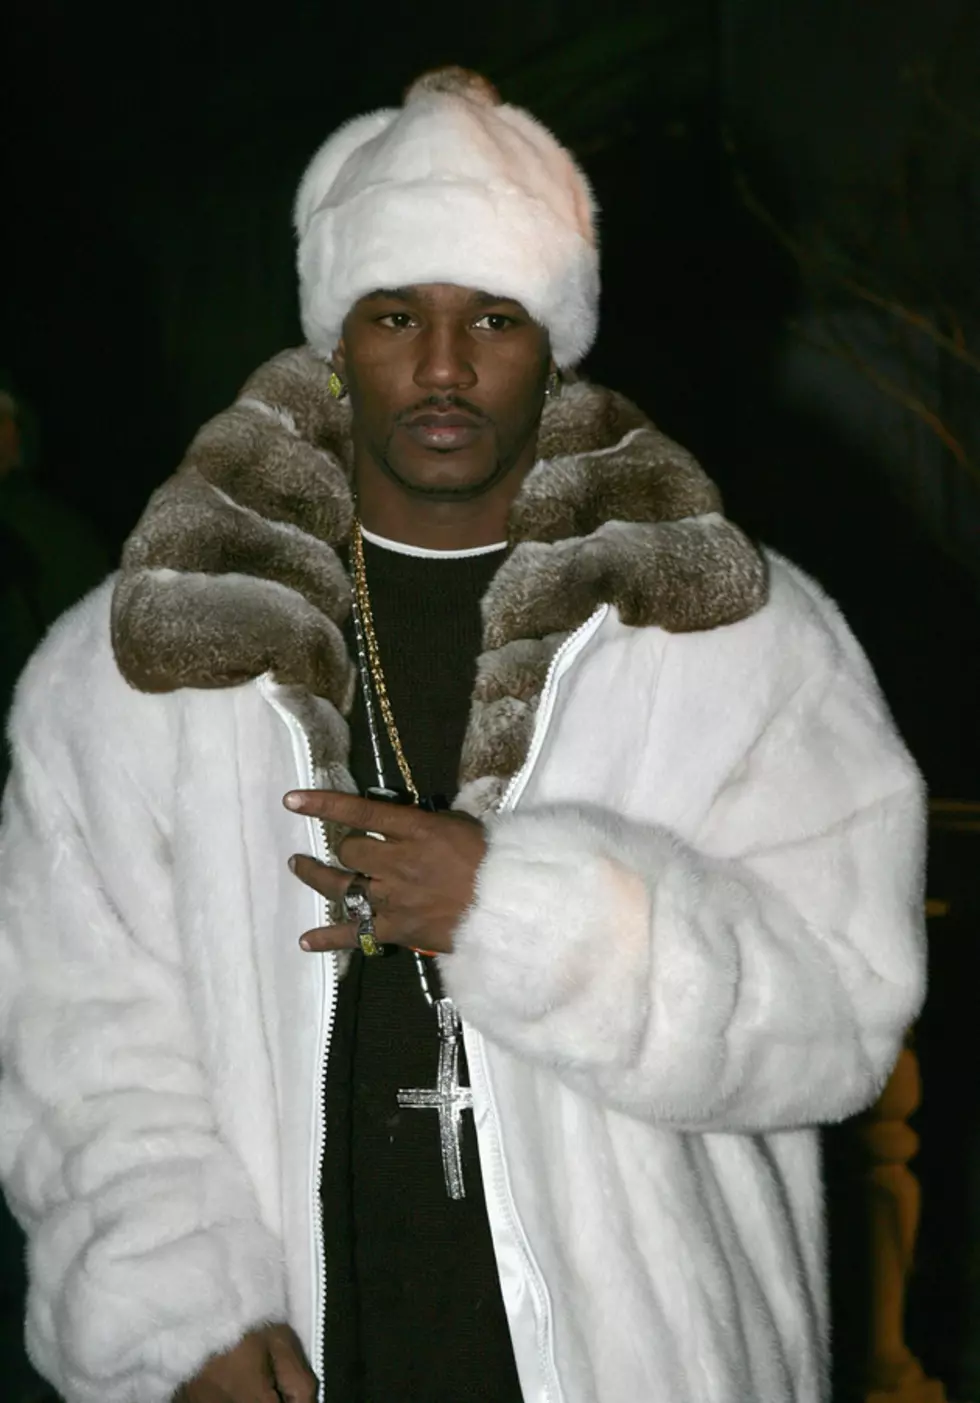 10 Rappers in Ridiculous Fur Coats